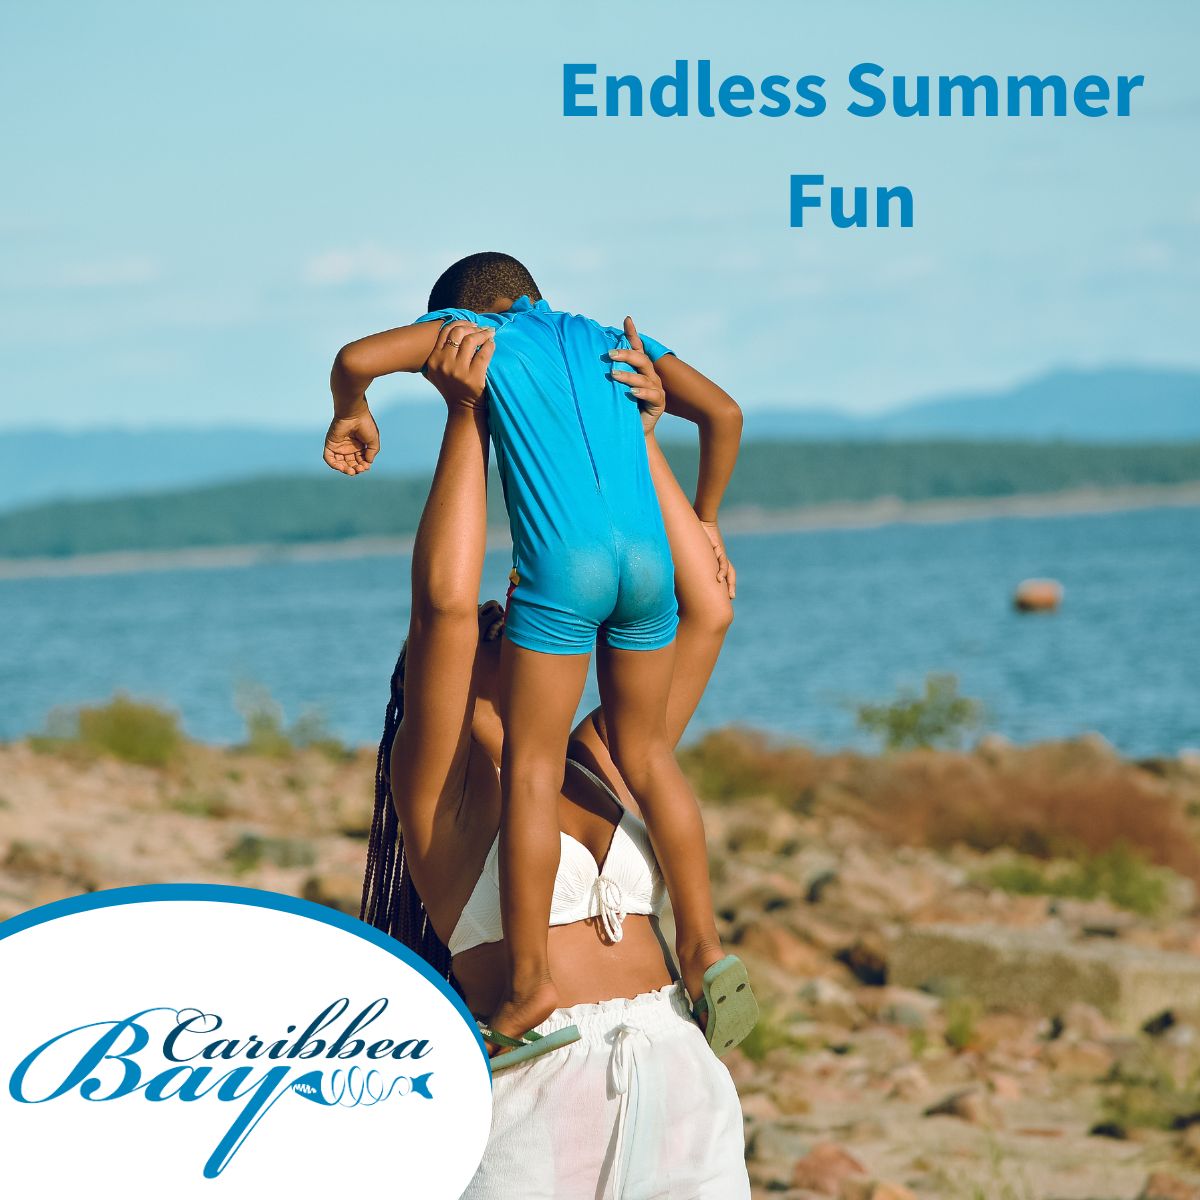 Beat the Monday blues by dreaming of sunny days and endless summer fun at our resort. Book your getaway and let the countdown to paradise begin!​

Get in touch with us on:​
WhatsApp +263 787 122 004​

#CaribbeaBay #ProudlyAfricanSun #ExperienceExploreEnjoy